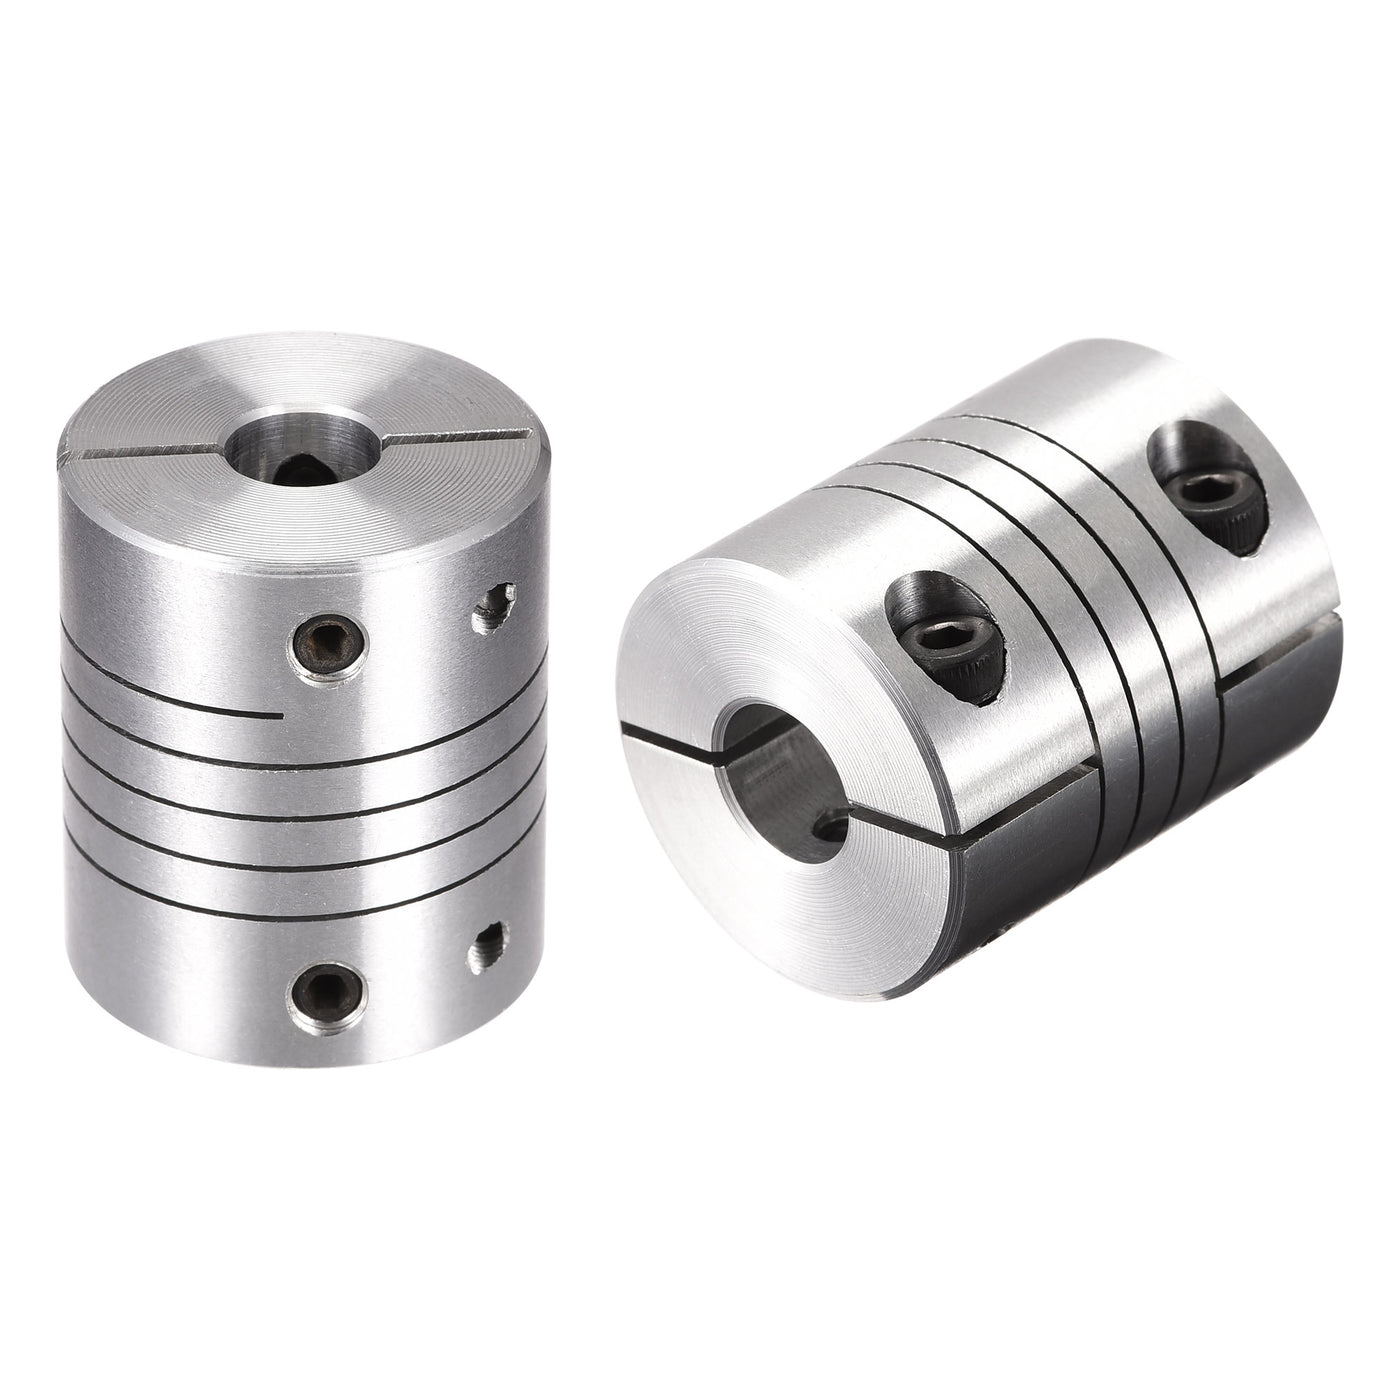 uxcell Uxcell 2PCS Motor Shaft 8mm to 10mm Helical Beam Coupler Coupling 25mm Dia 30mm Length